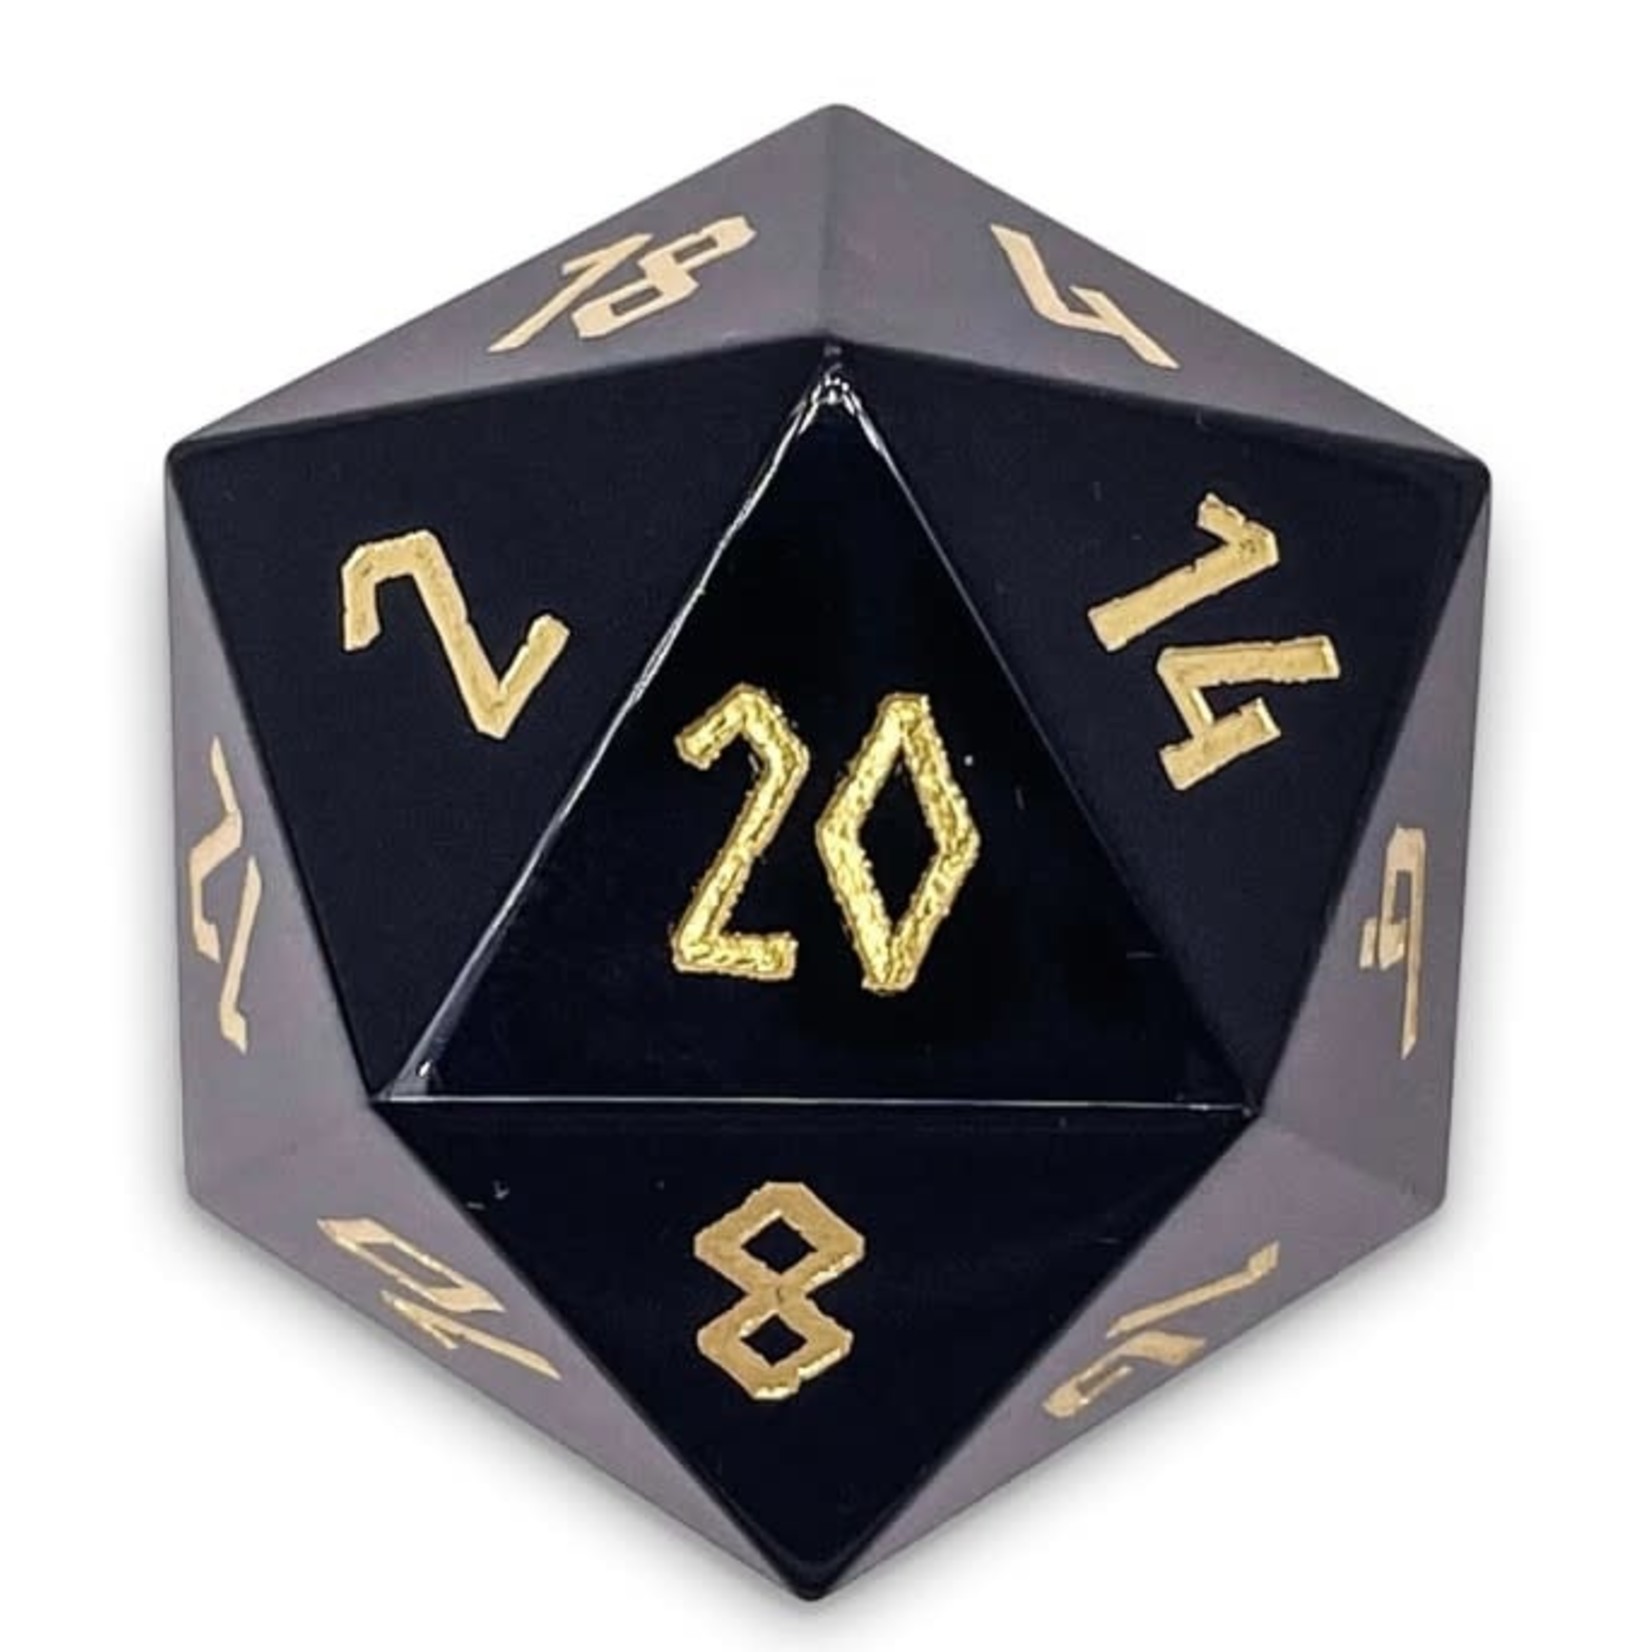 Norse Foundry Boulder 30mm Gemstone Dice - Black Obsidian with Gold Numbers